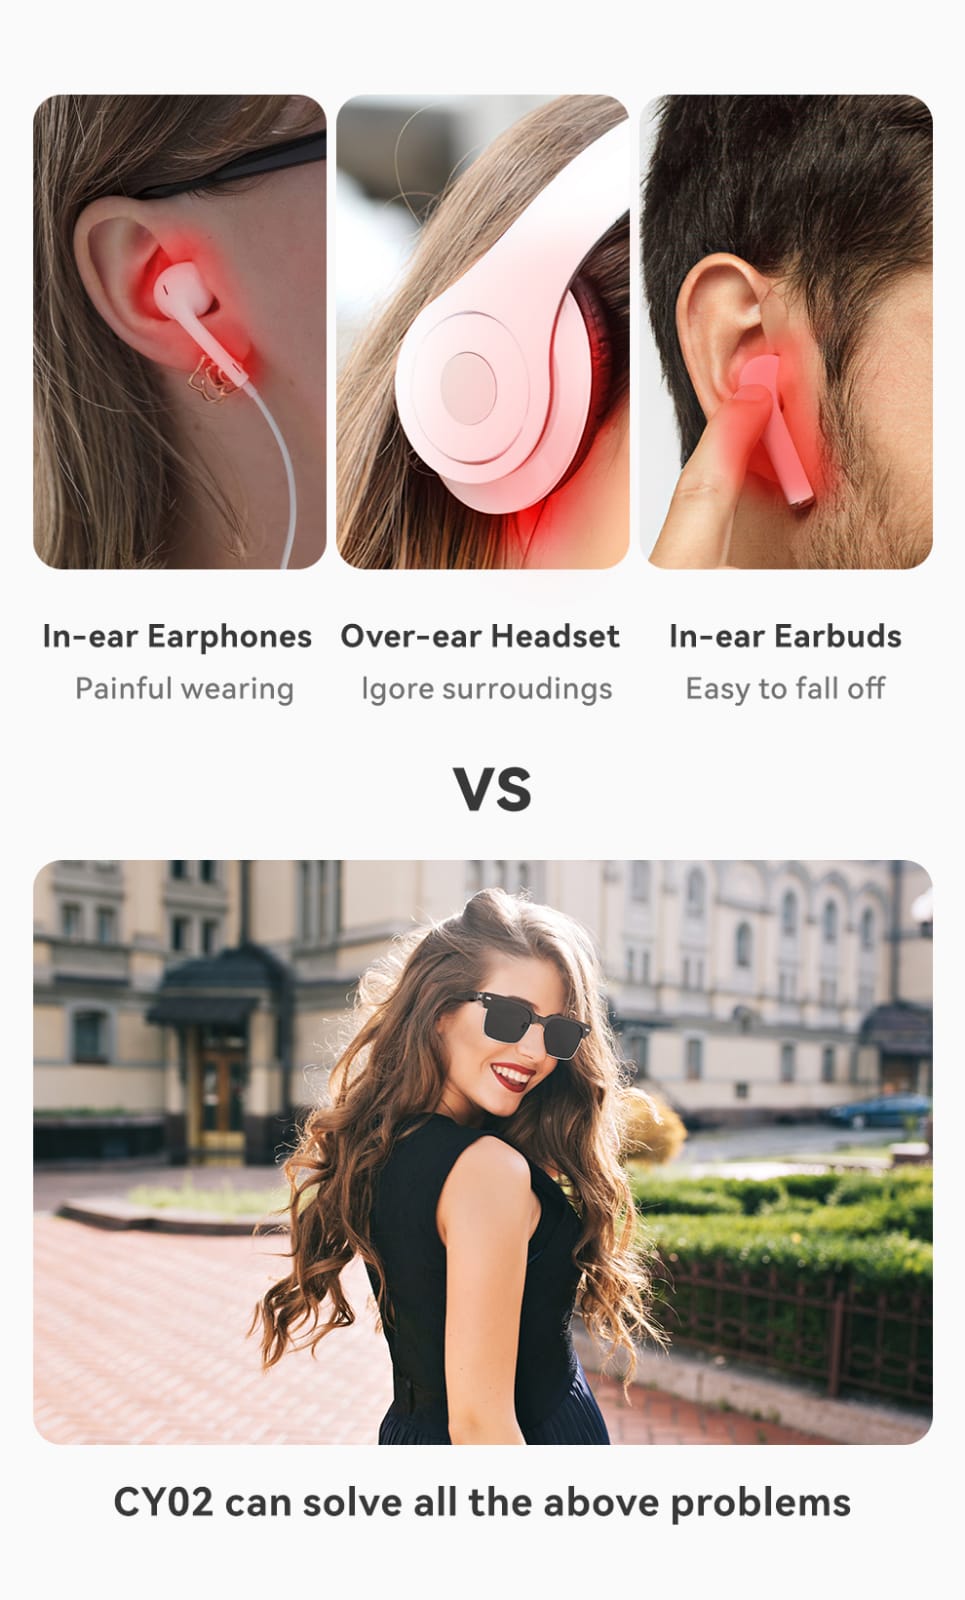 eEAR® eEAR-BTGC-CIC : 3 Functions in One System Bluetooth Bone Conduction optical Sun smart audio glasses sound technically, Rechargeable CIC miniature Hearing aids with Bluetooth technology. Designed and Engineered in the USA